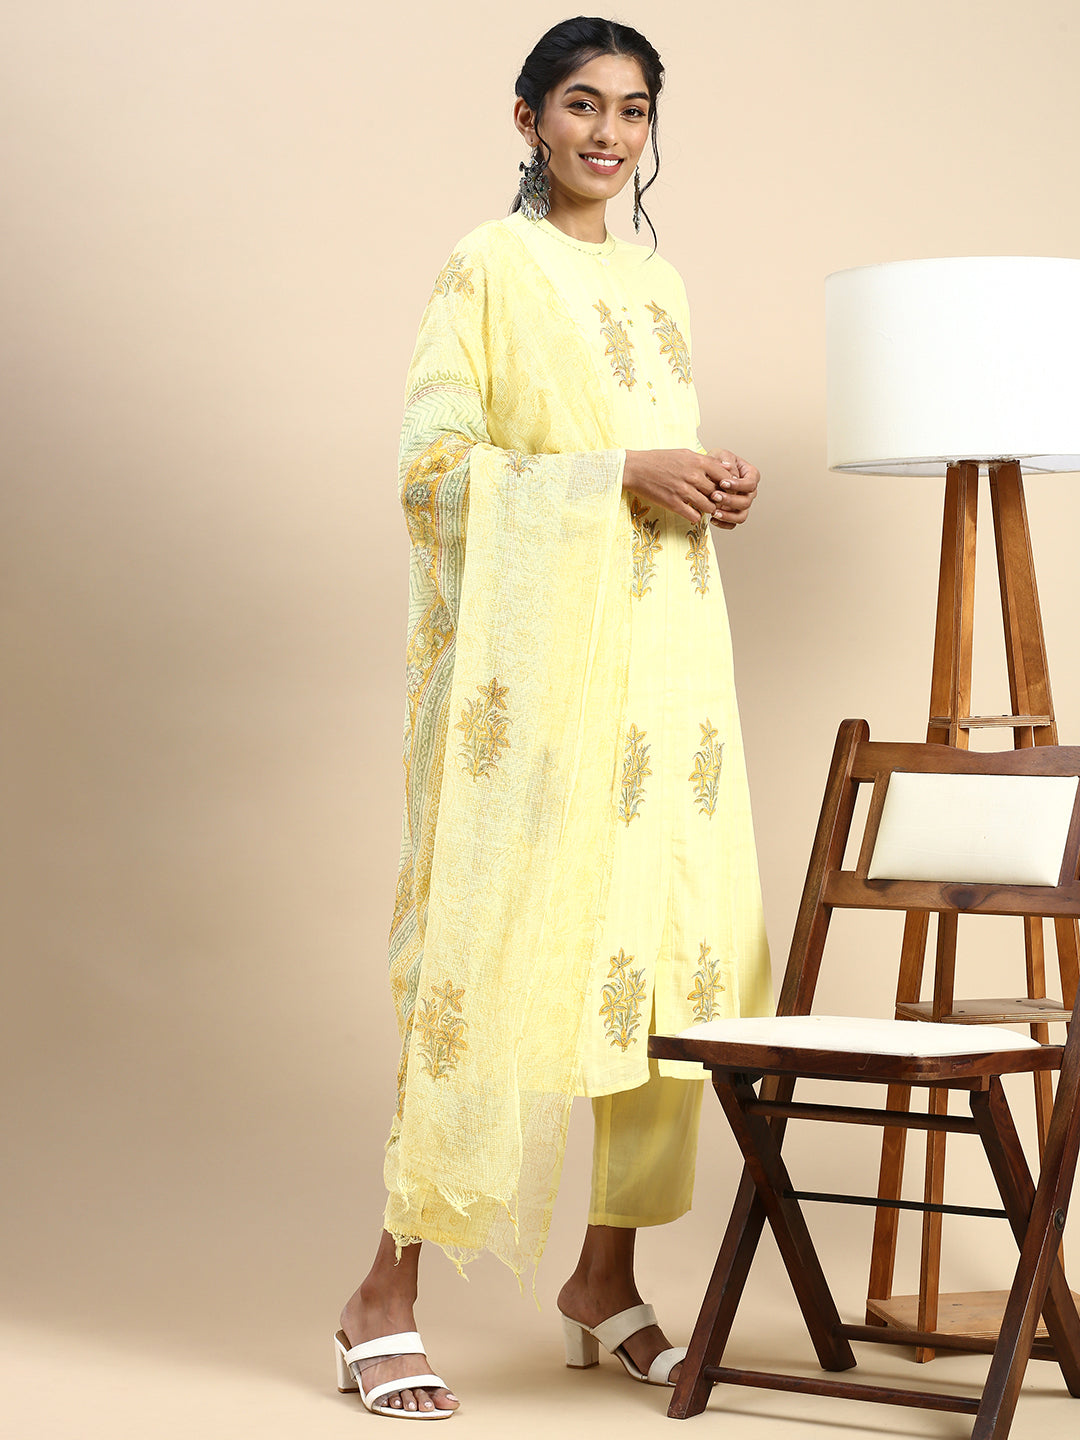 Ramrajcottondhoti  Introducing our new collection of women's